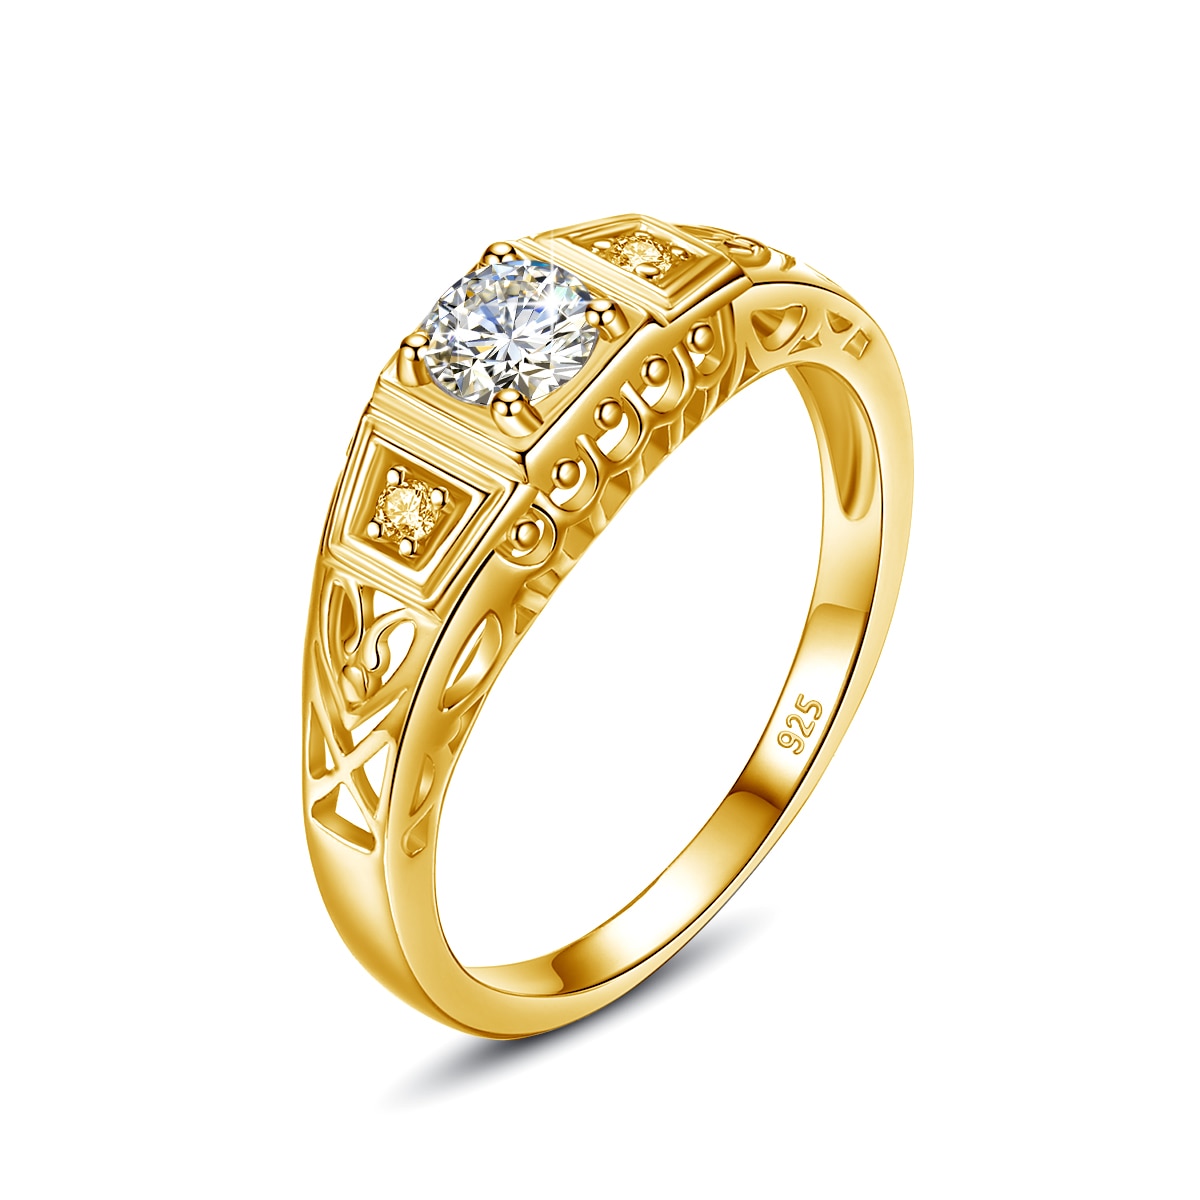 A gold Edwardian style vintage filigree engagement ring with a larger stone surrounded by two smaller side stones.